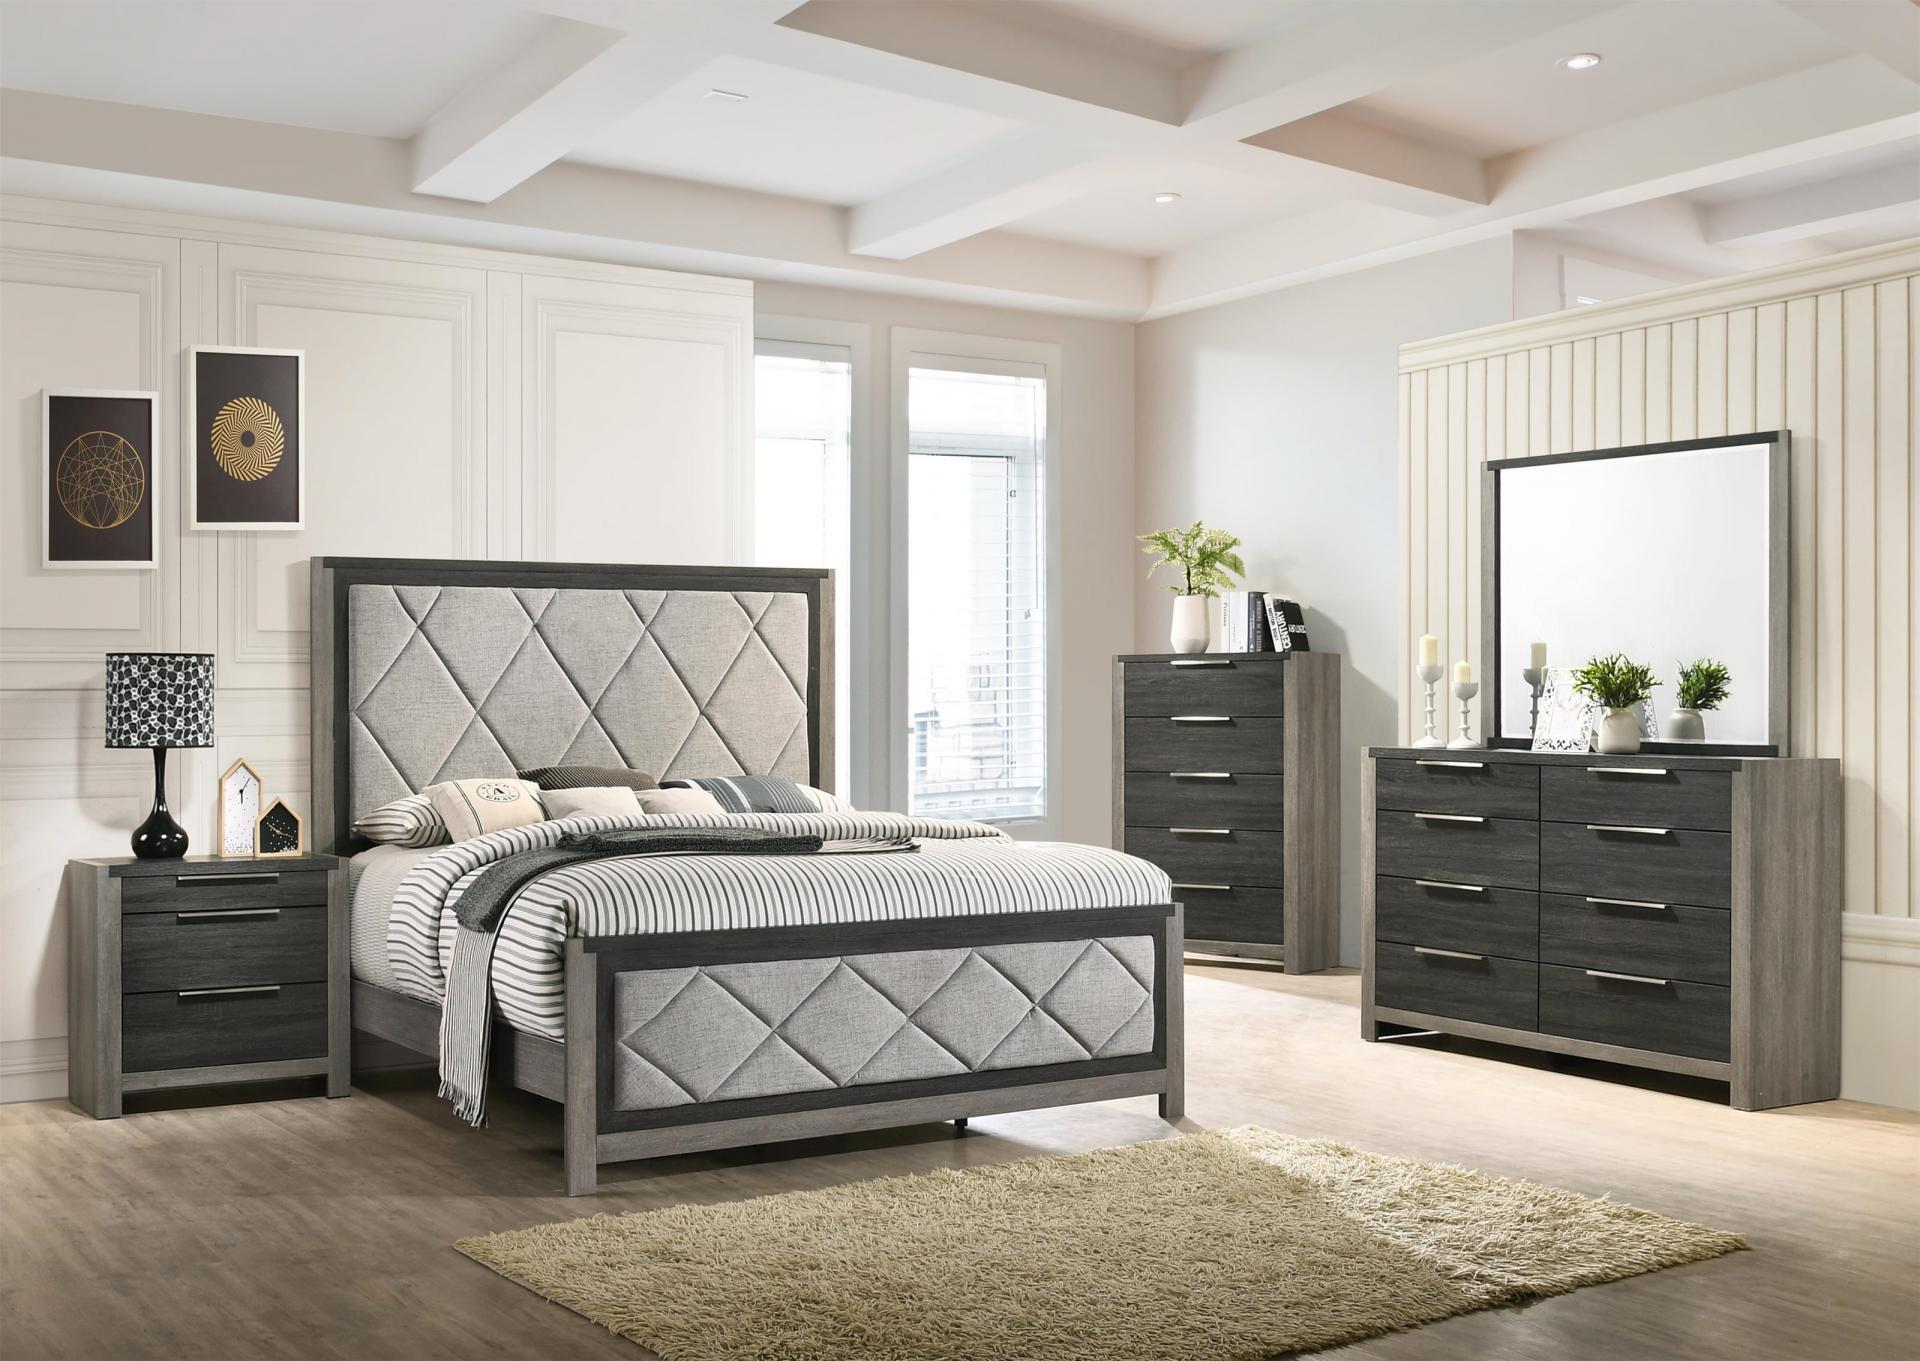 Panel Gray Two Tone Bedroom Group with Panel Bed, Dresser, Mirror, and Nightstand